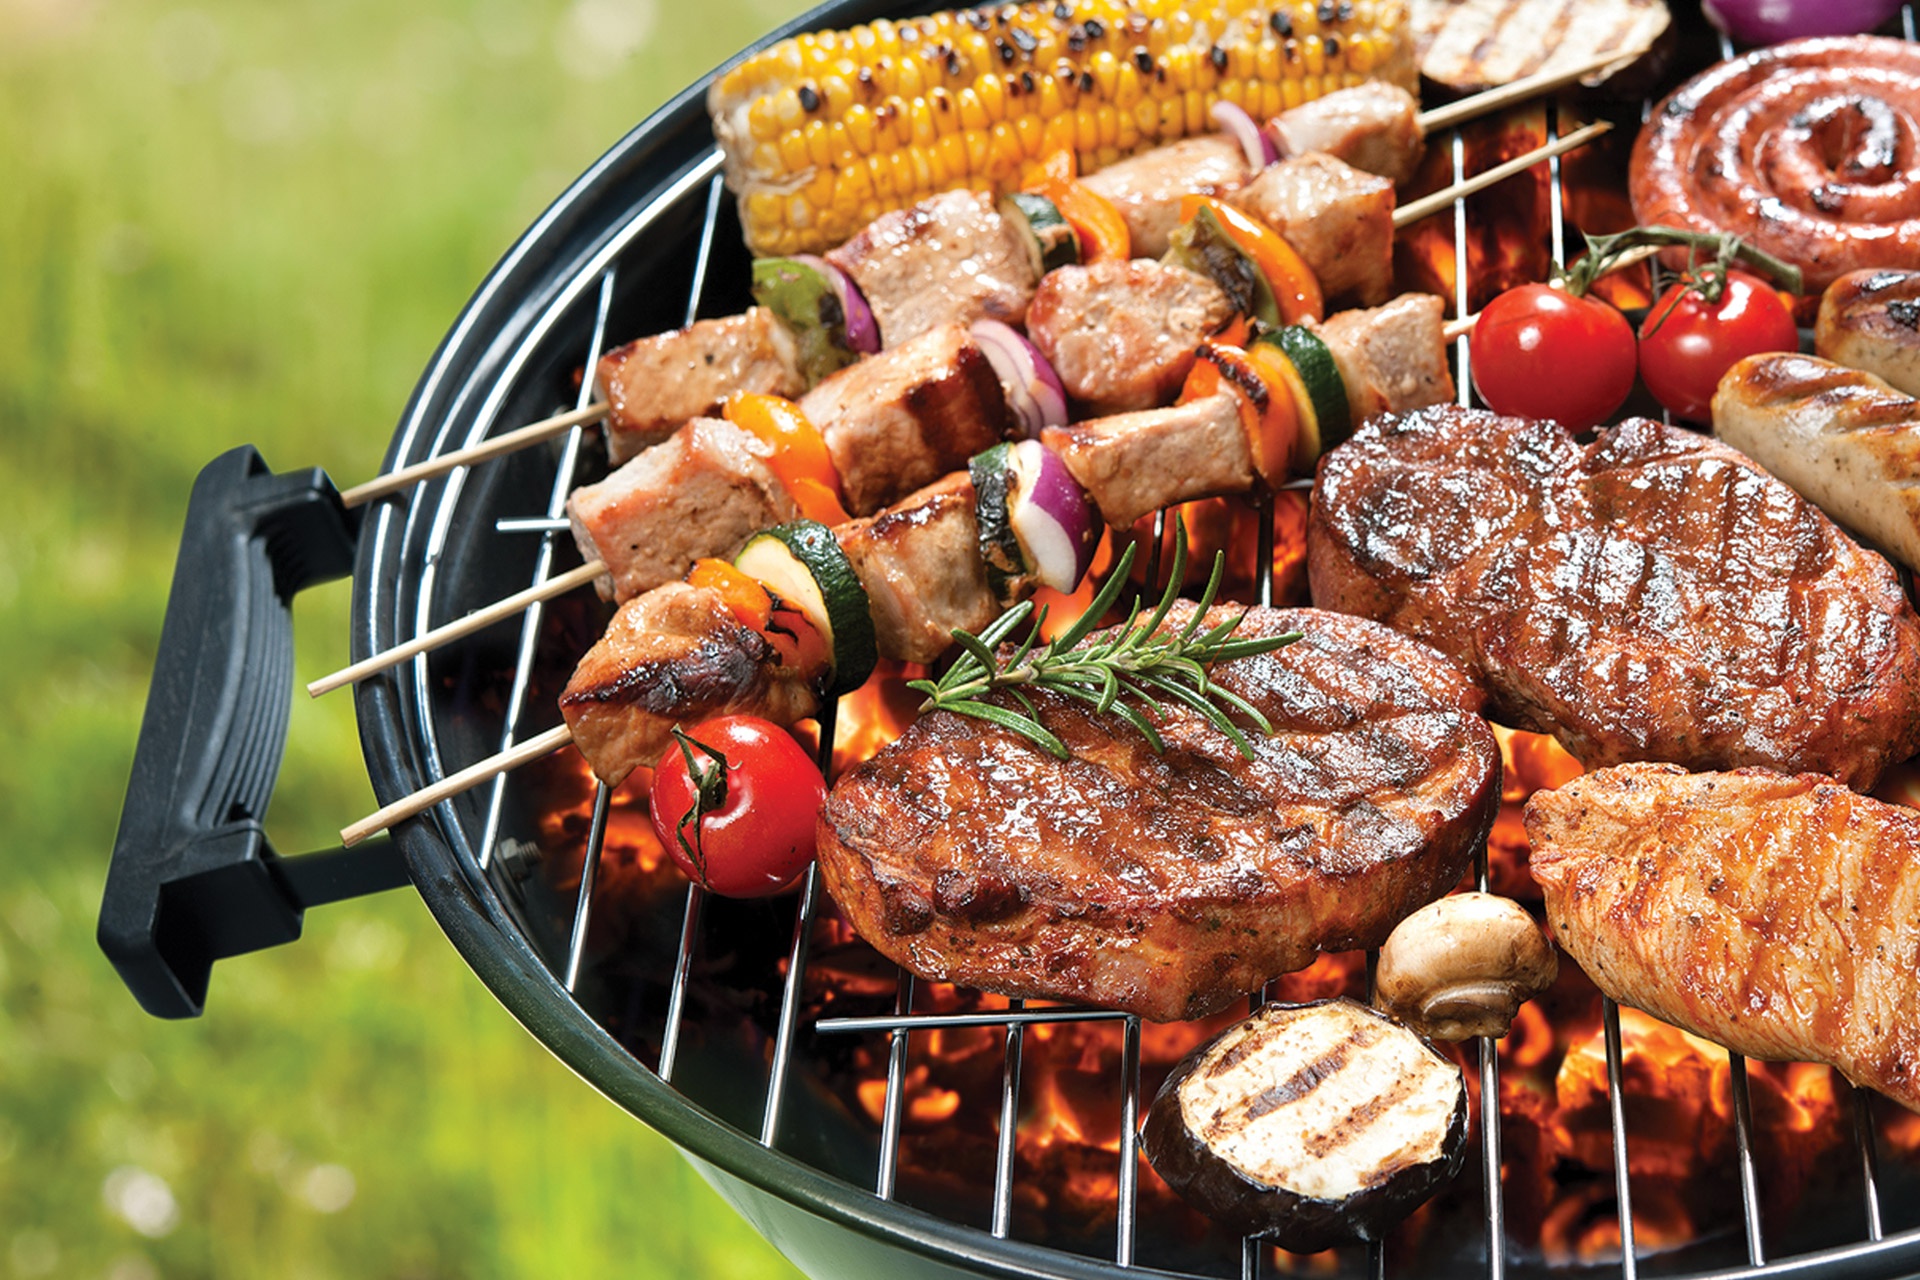 General 1920x1280 meat vegetables barbecue grill corn cooking steak tomatoes mushroom sausage rosemary red onion bell peppers food zucchini (vegetable) beef closeup